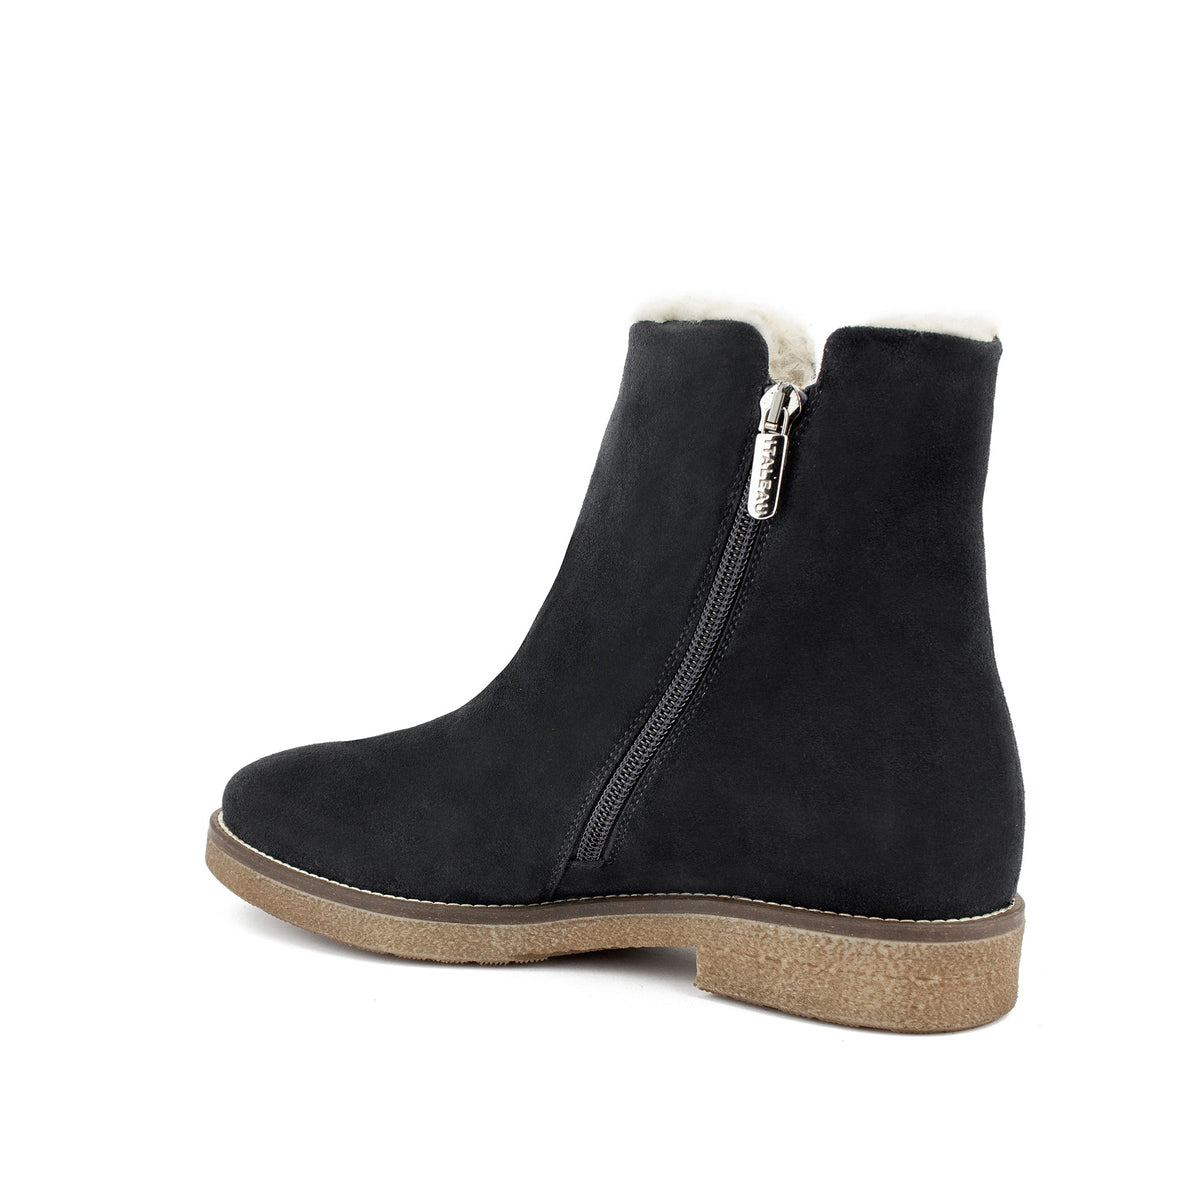 Italeau Fiorella booties are winter-weather ready, lined in real shearling and made in Italy